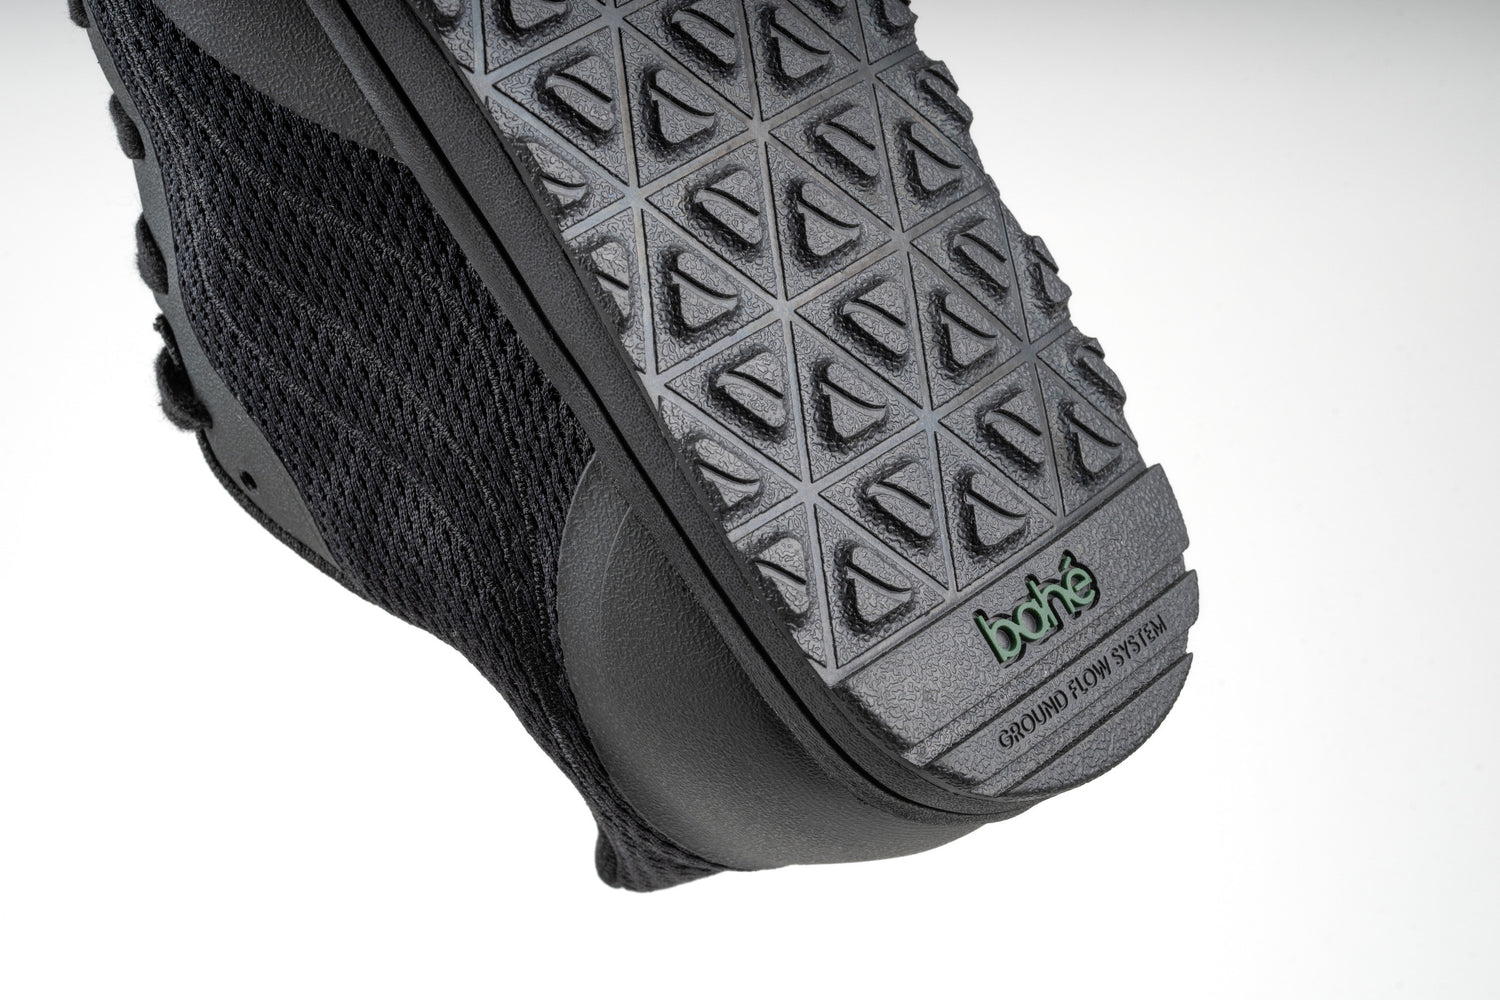 Close-up of 'ground flow system' word mark debossed on outsole of Bahé Revive barefoot style grounding shoes in Eclipse (black)